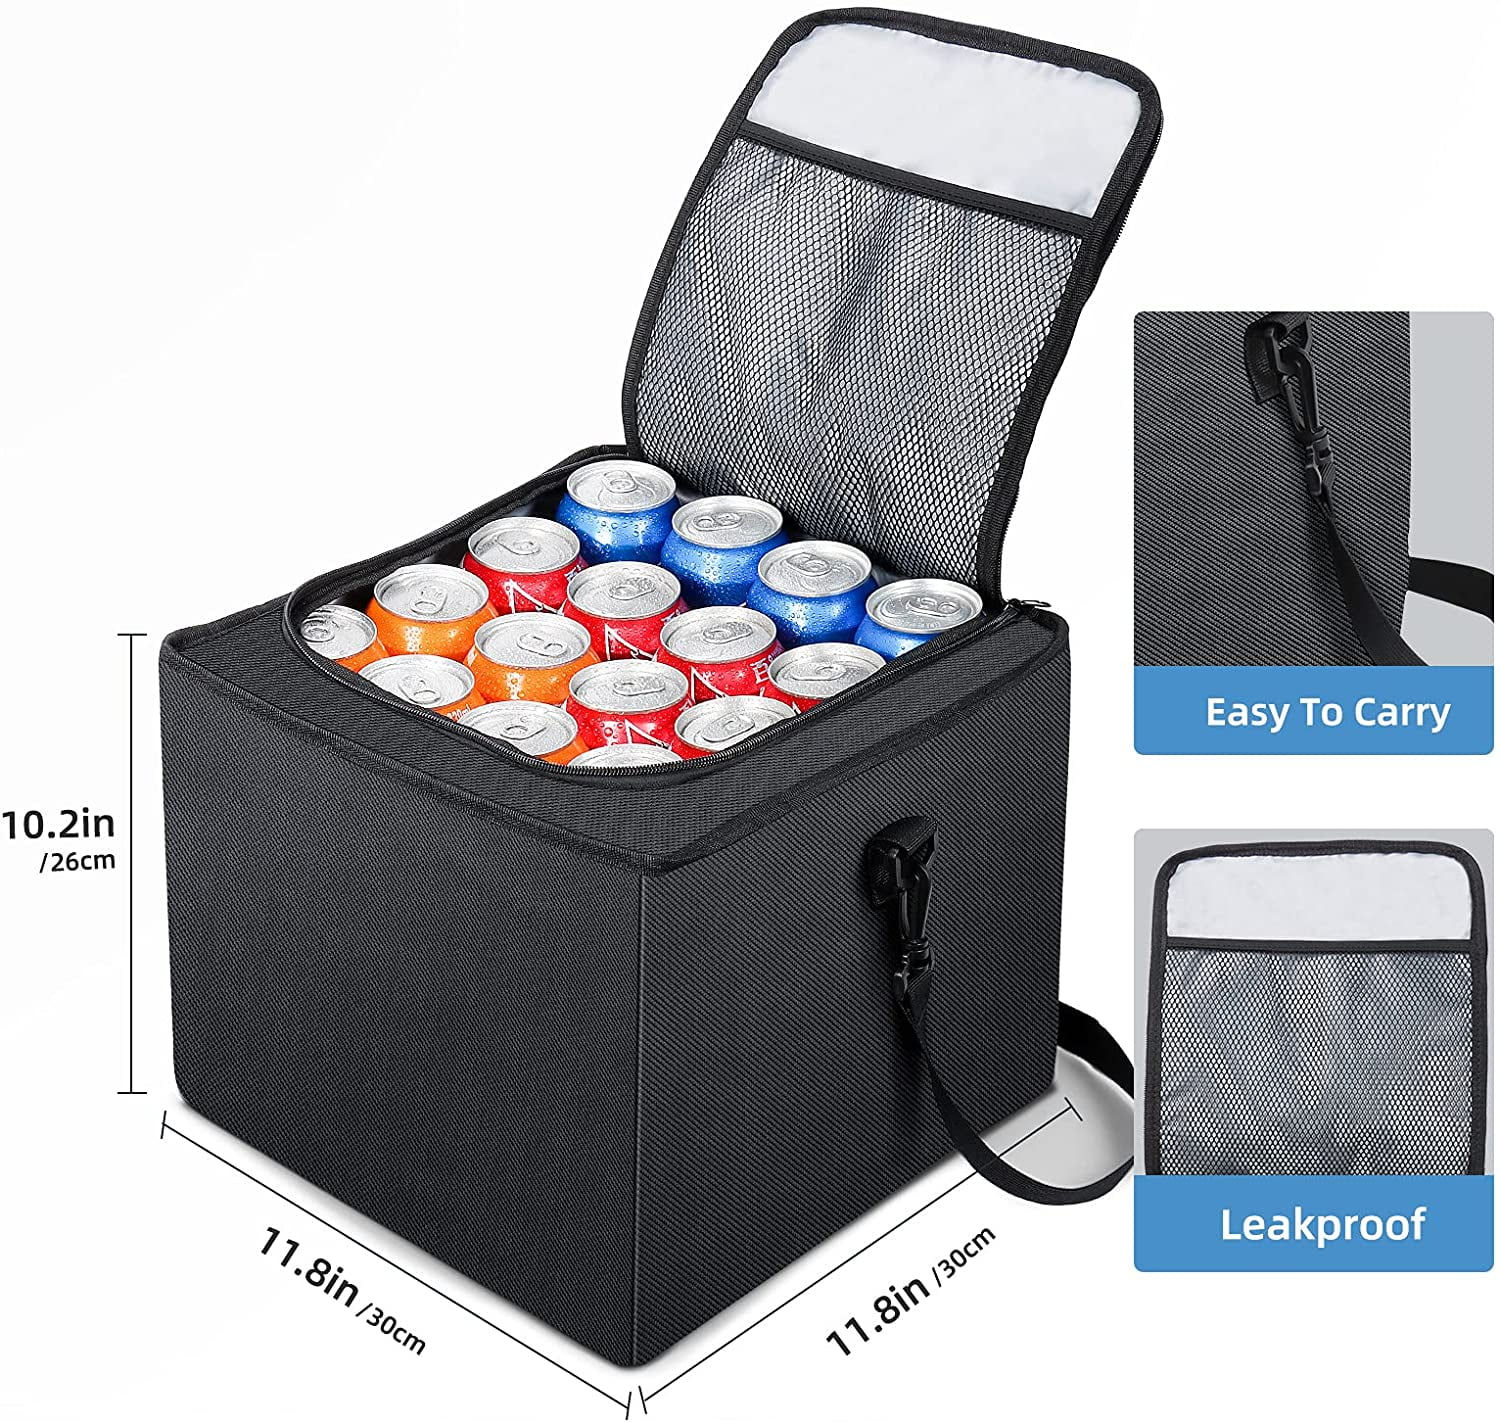 UBS 3D ORGANIZER MULTI POCKET WIITH TRAY FOR VOLKSWAGEN POLO EXQUISITE  Trunk Organizer Price in India - Buy UBS 3D ORGANIZER MULTI POCKET WIITH  TRAY FOR VOLKSWAGEN POLO EXQUISITE Trunk Organizer online